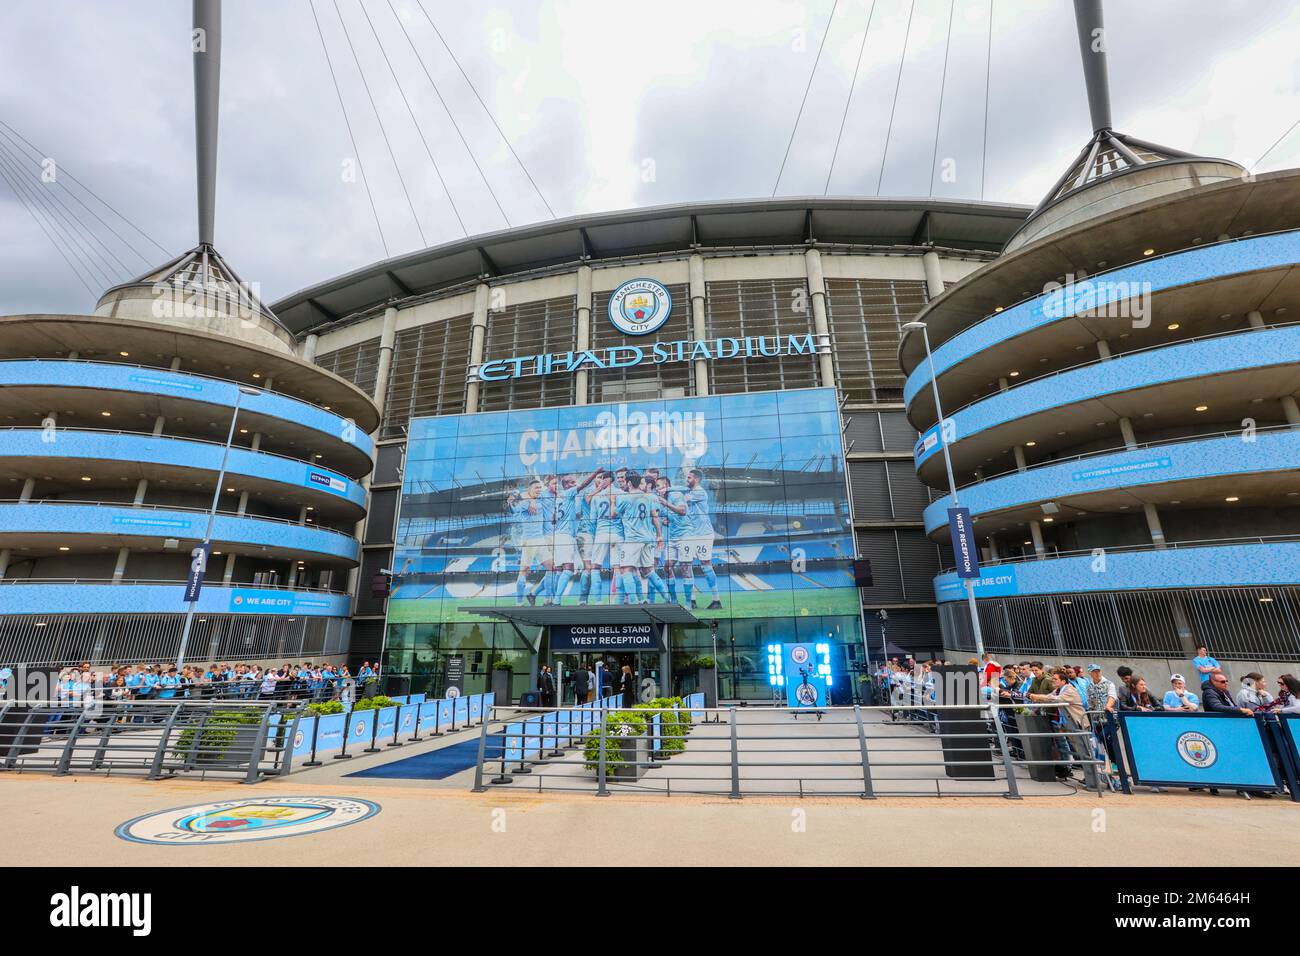 Etihad Stadium,Manchester City,Manchester City football club,fans,Manchester,city,city centre,center,North West, England,North West England,English,English City,Levelling Up,Greater Manchester, GB,Great Britain,Britain,British,UK,United Kingdom,English city, Stock Photo